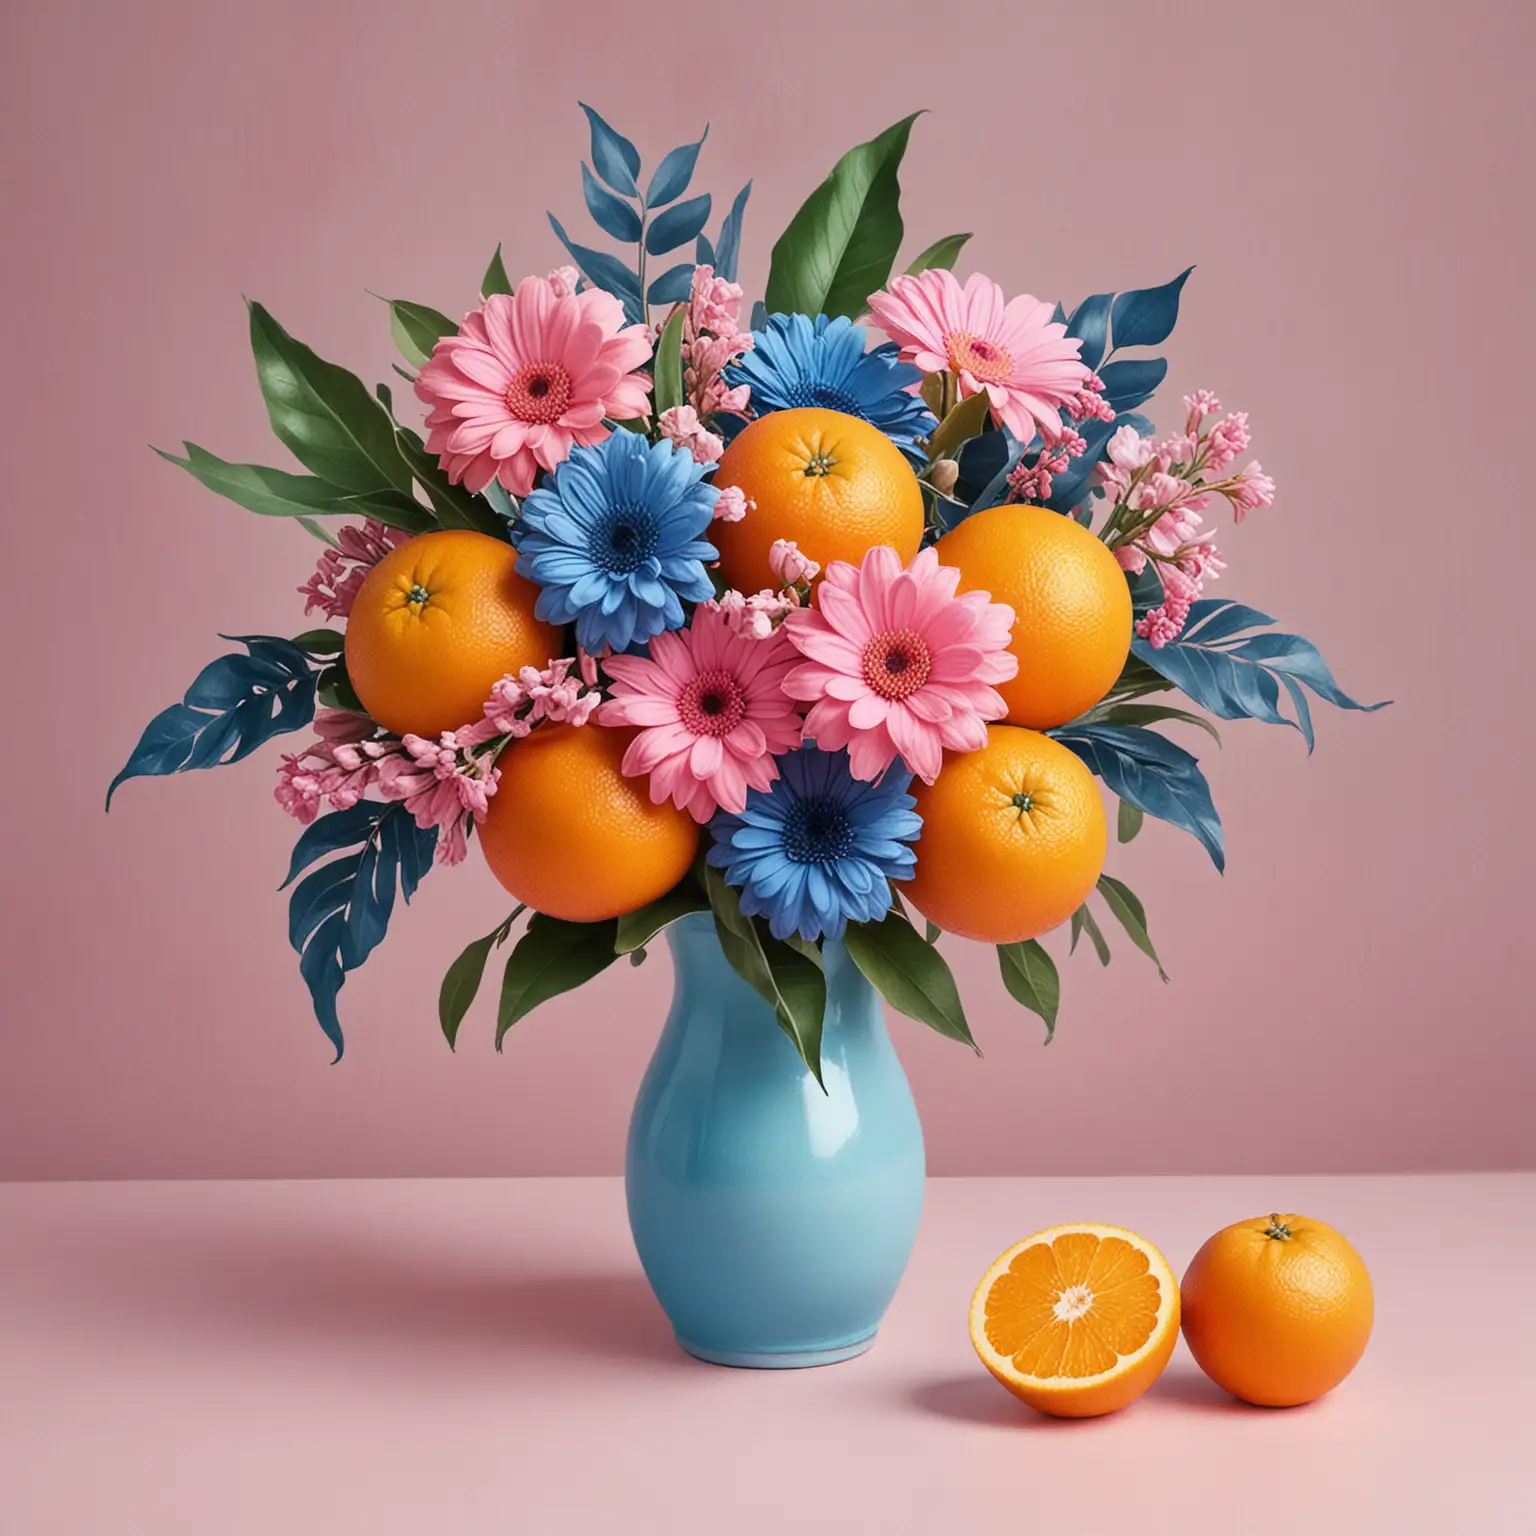 Vibrant Bouquet of Blue and Pink Oranges Whimsical Fruit Art